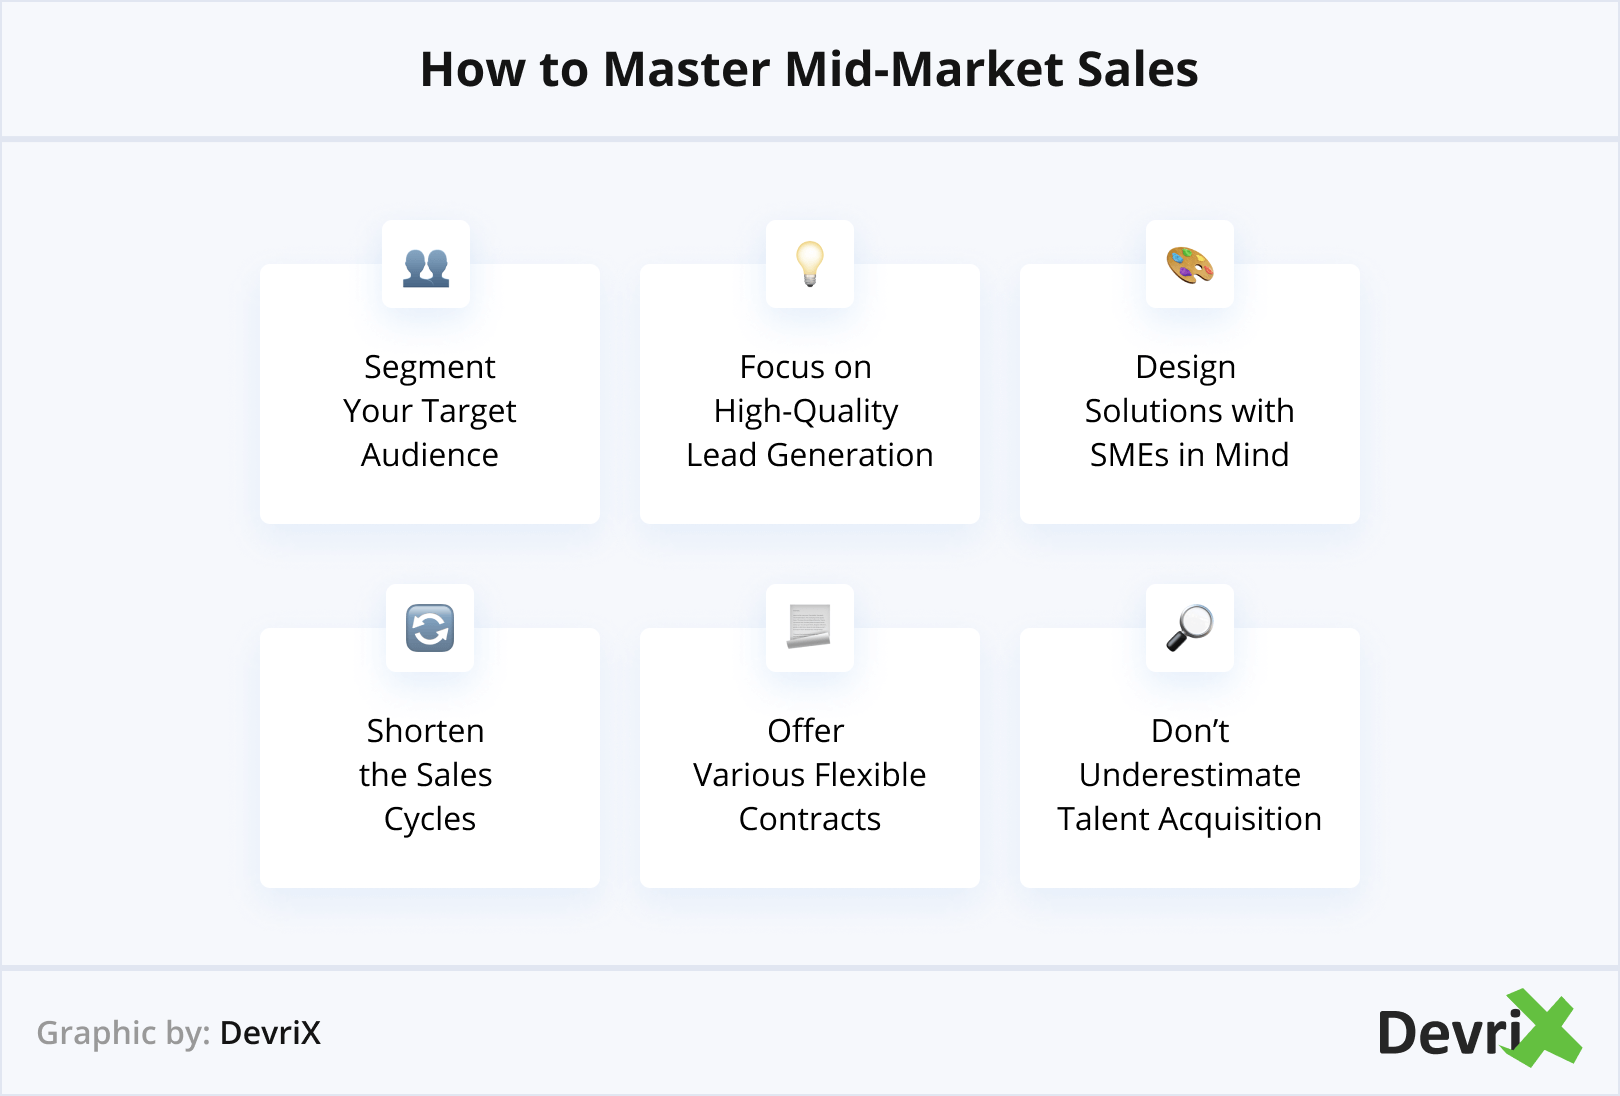 How to Master Mid-Market Sales